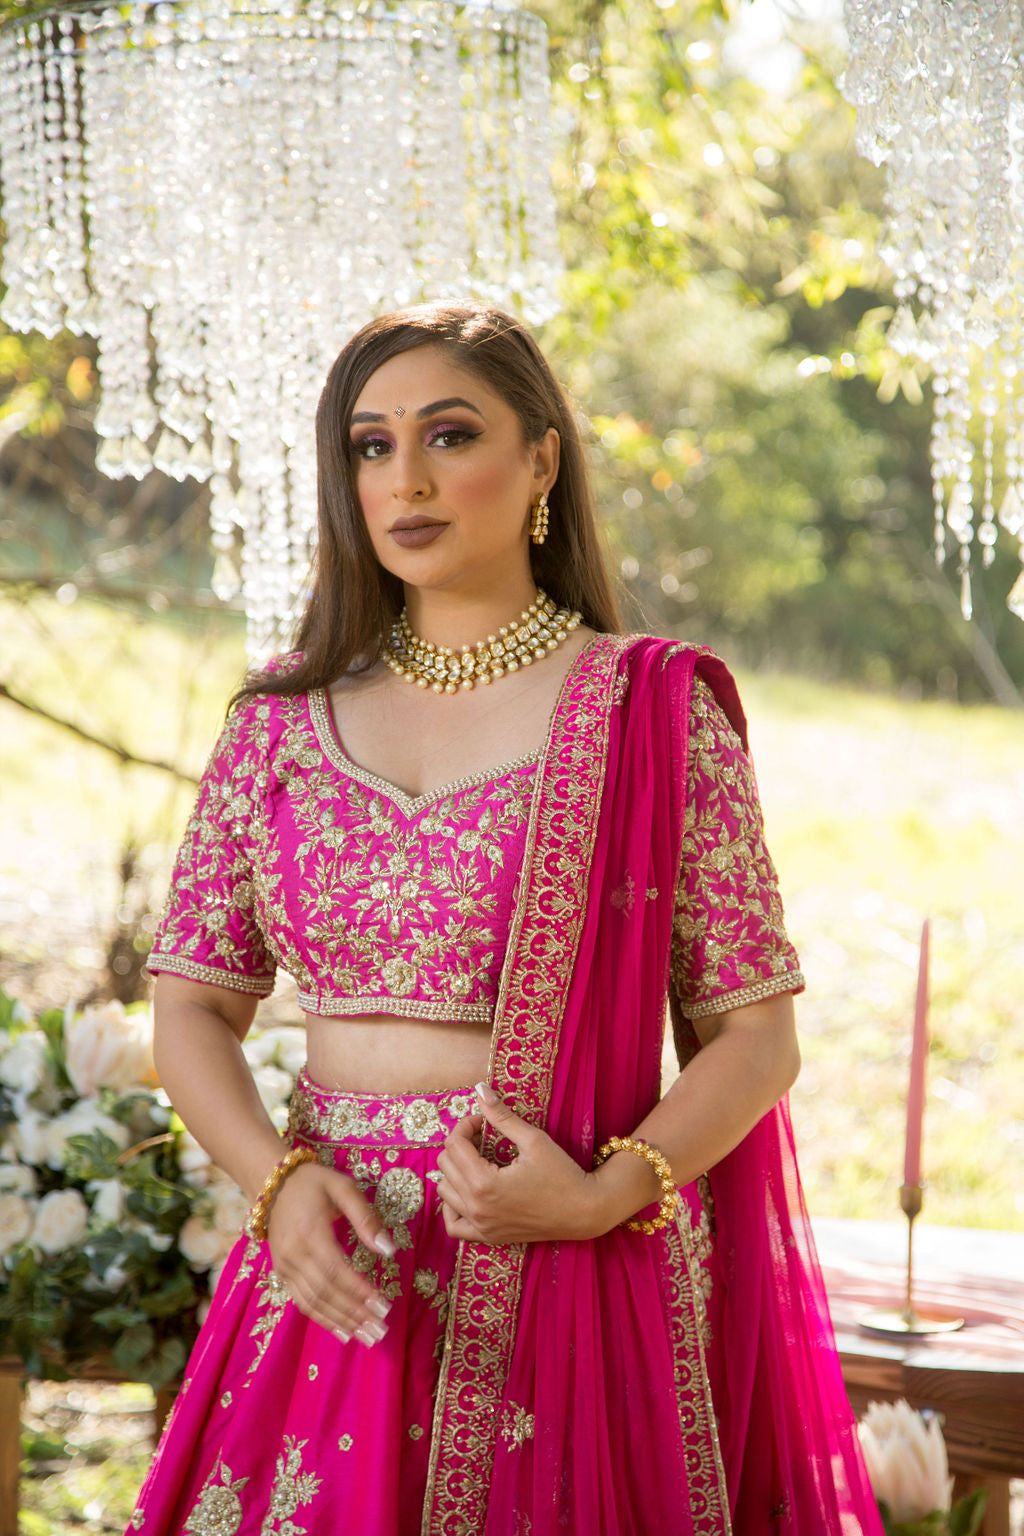 Photo of Bride wearing light pink lehenga and green contrasting jewellery